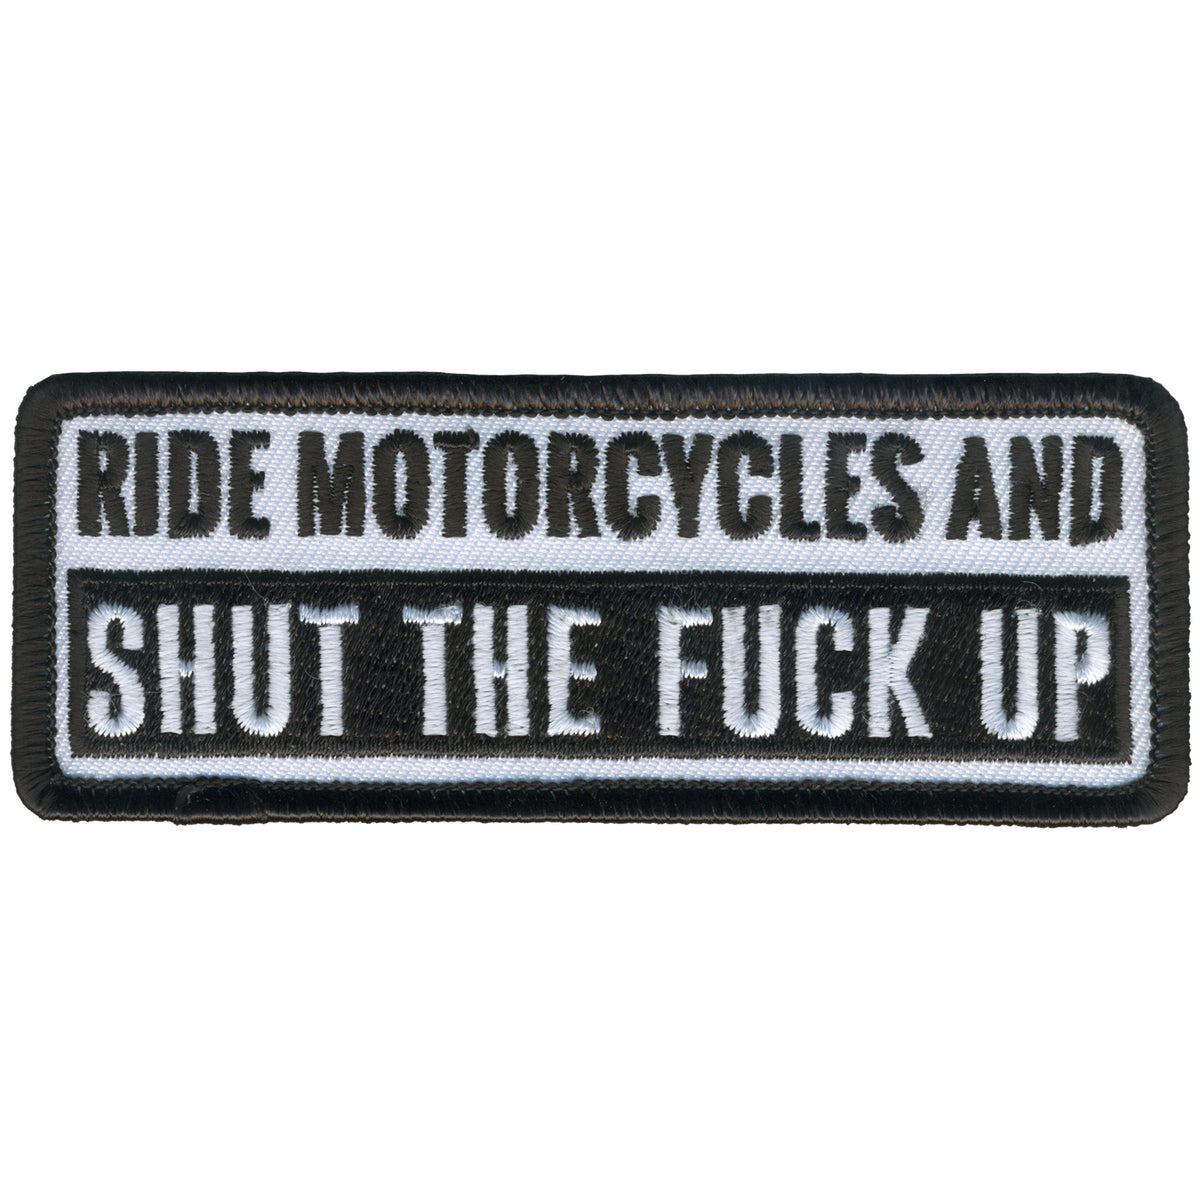 Hot Leathers PPL9791 Ride and Shut Up 4"x 2" Patch